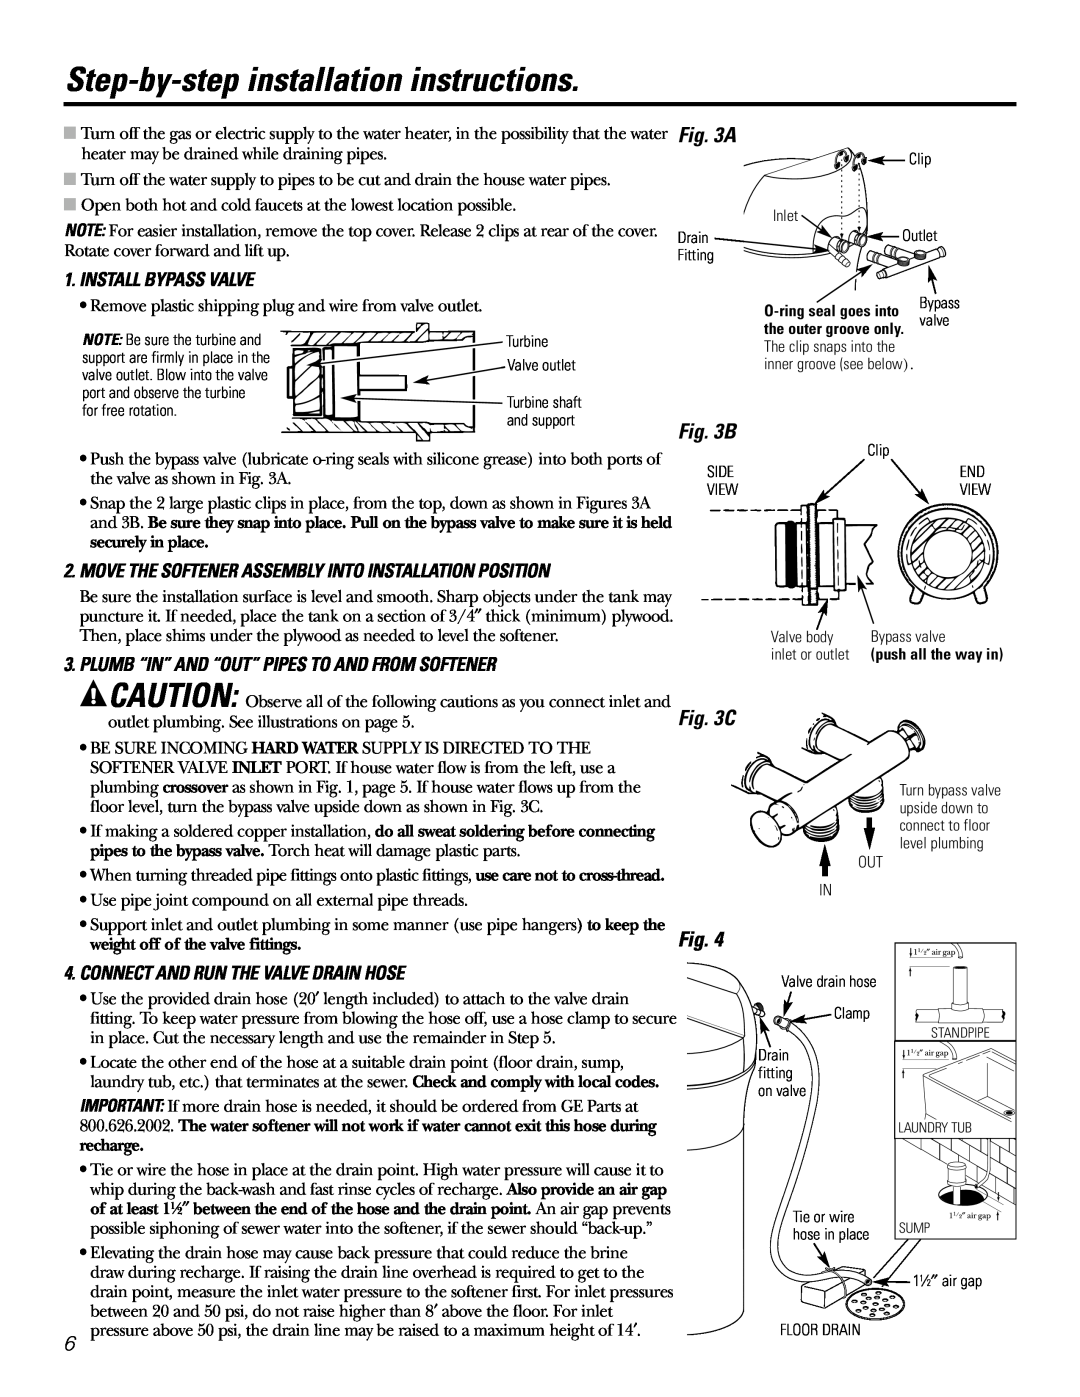 GE GXSF27E manual Step-by-stepinstallation instructions, Install Bypass Valve, Connect And Run The Valve Drain Hose 